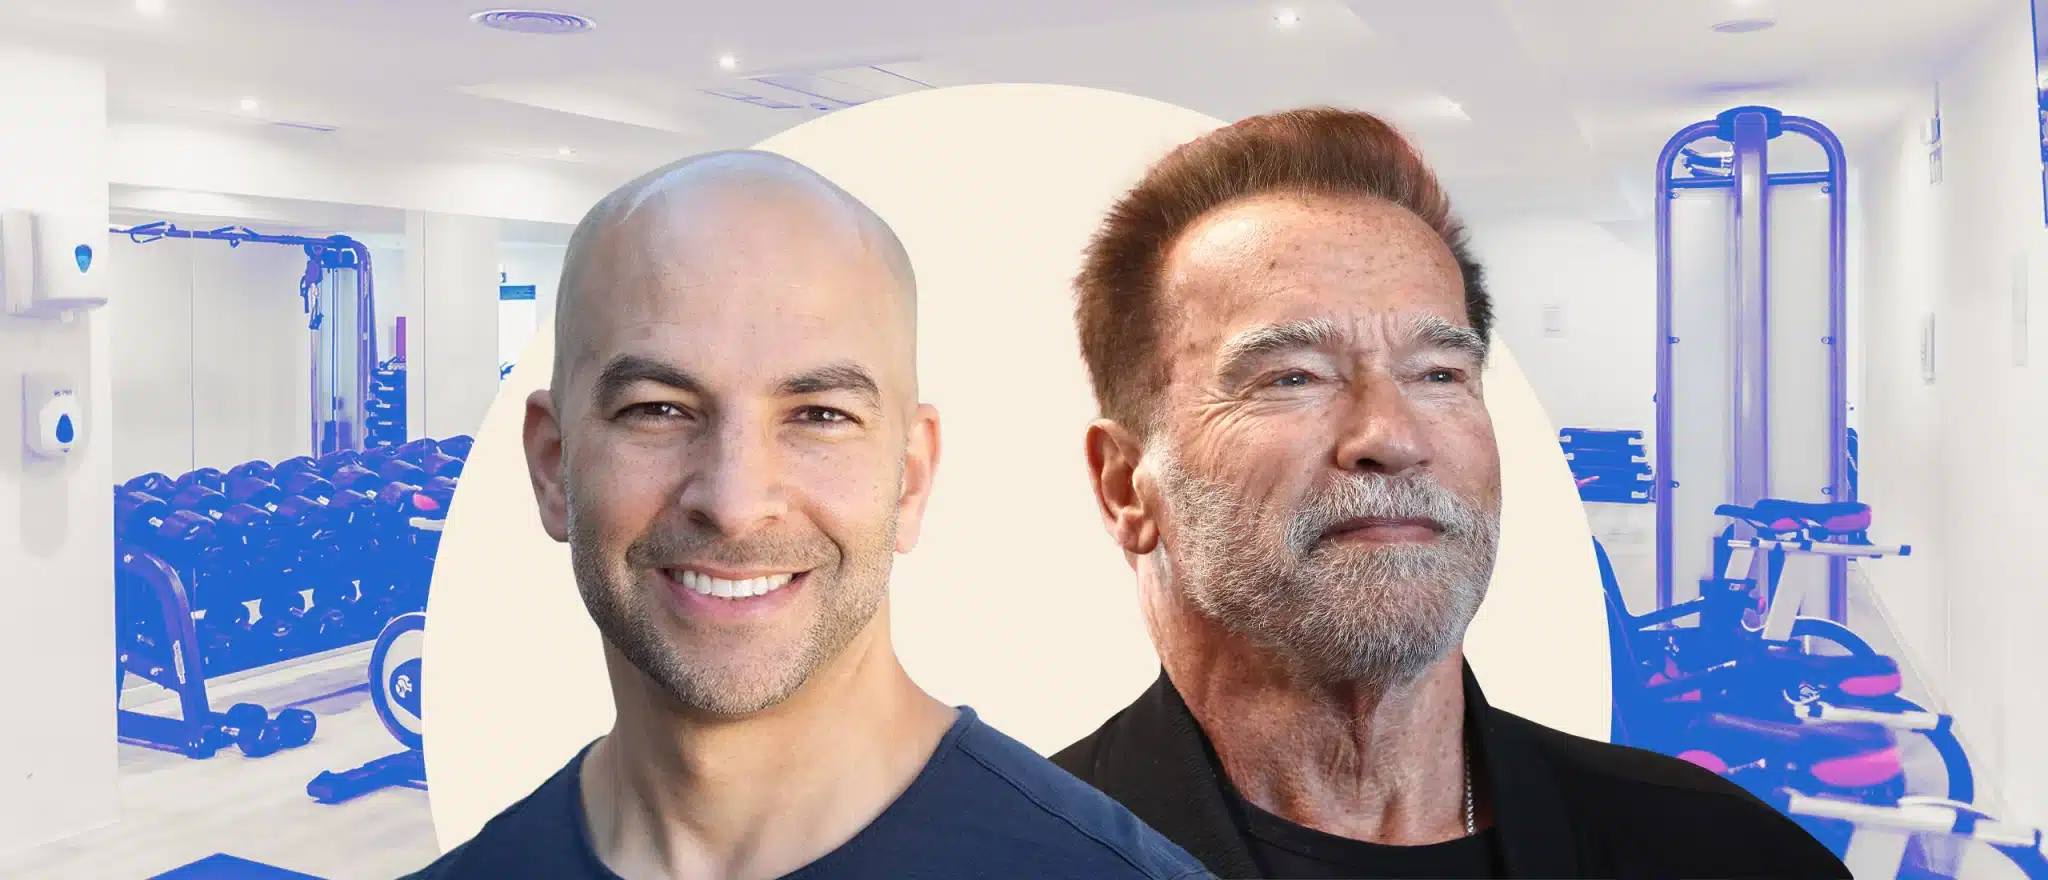 Attia Training With Schwarzenegger Is the Workout Inspiration You Didn’t Know You Needed